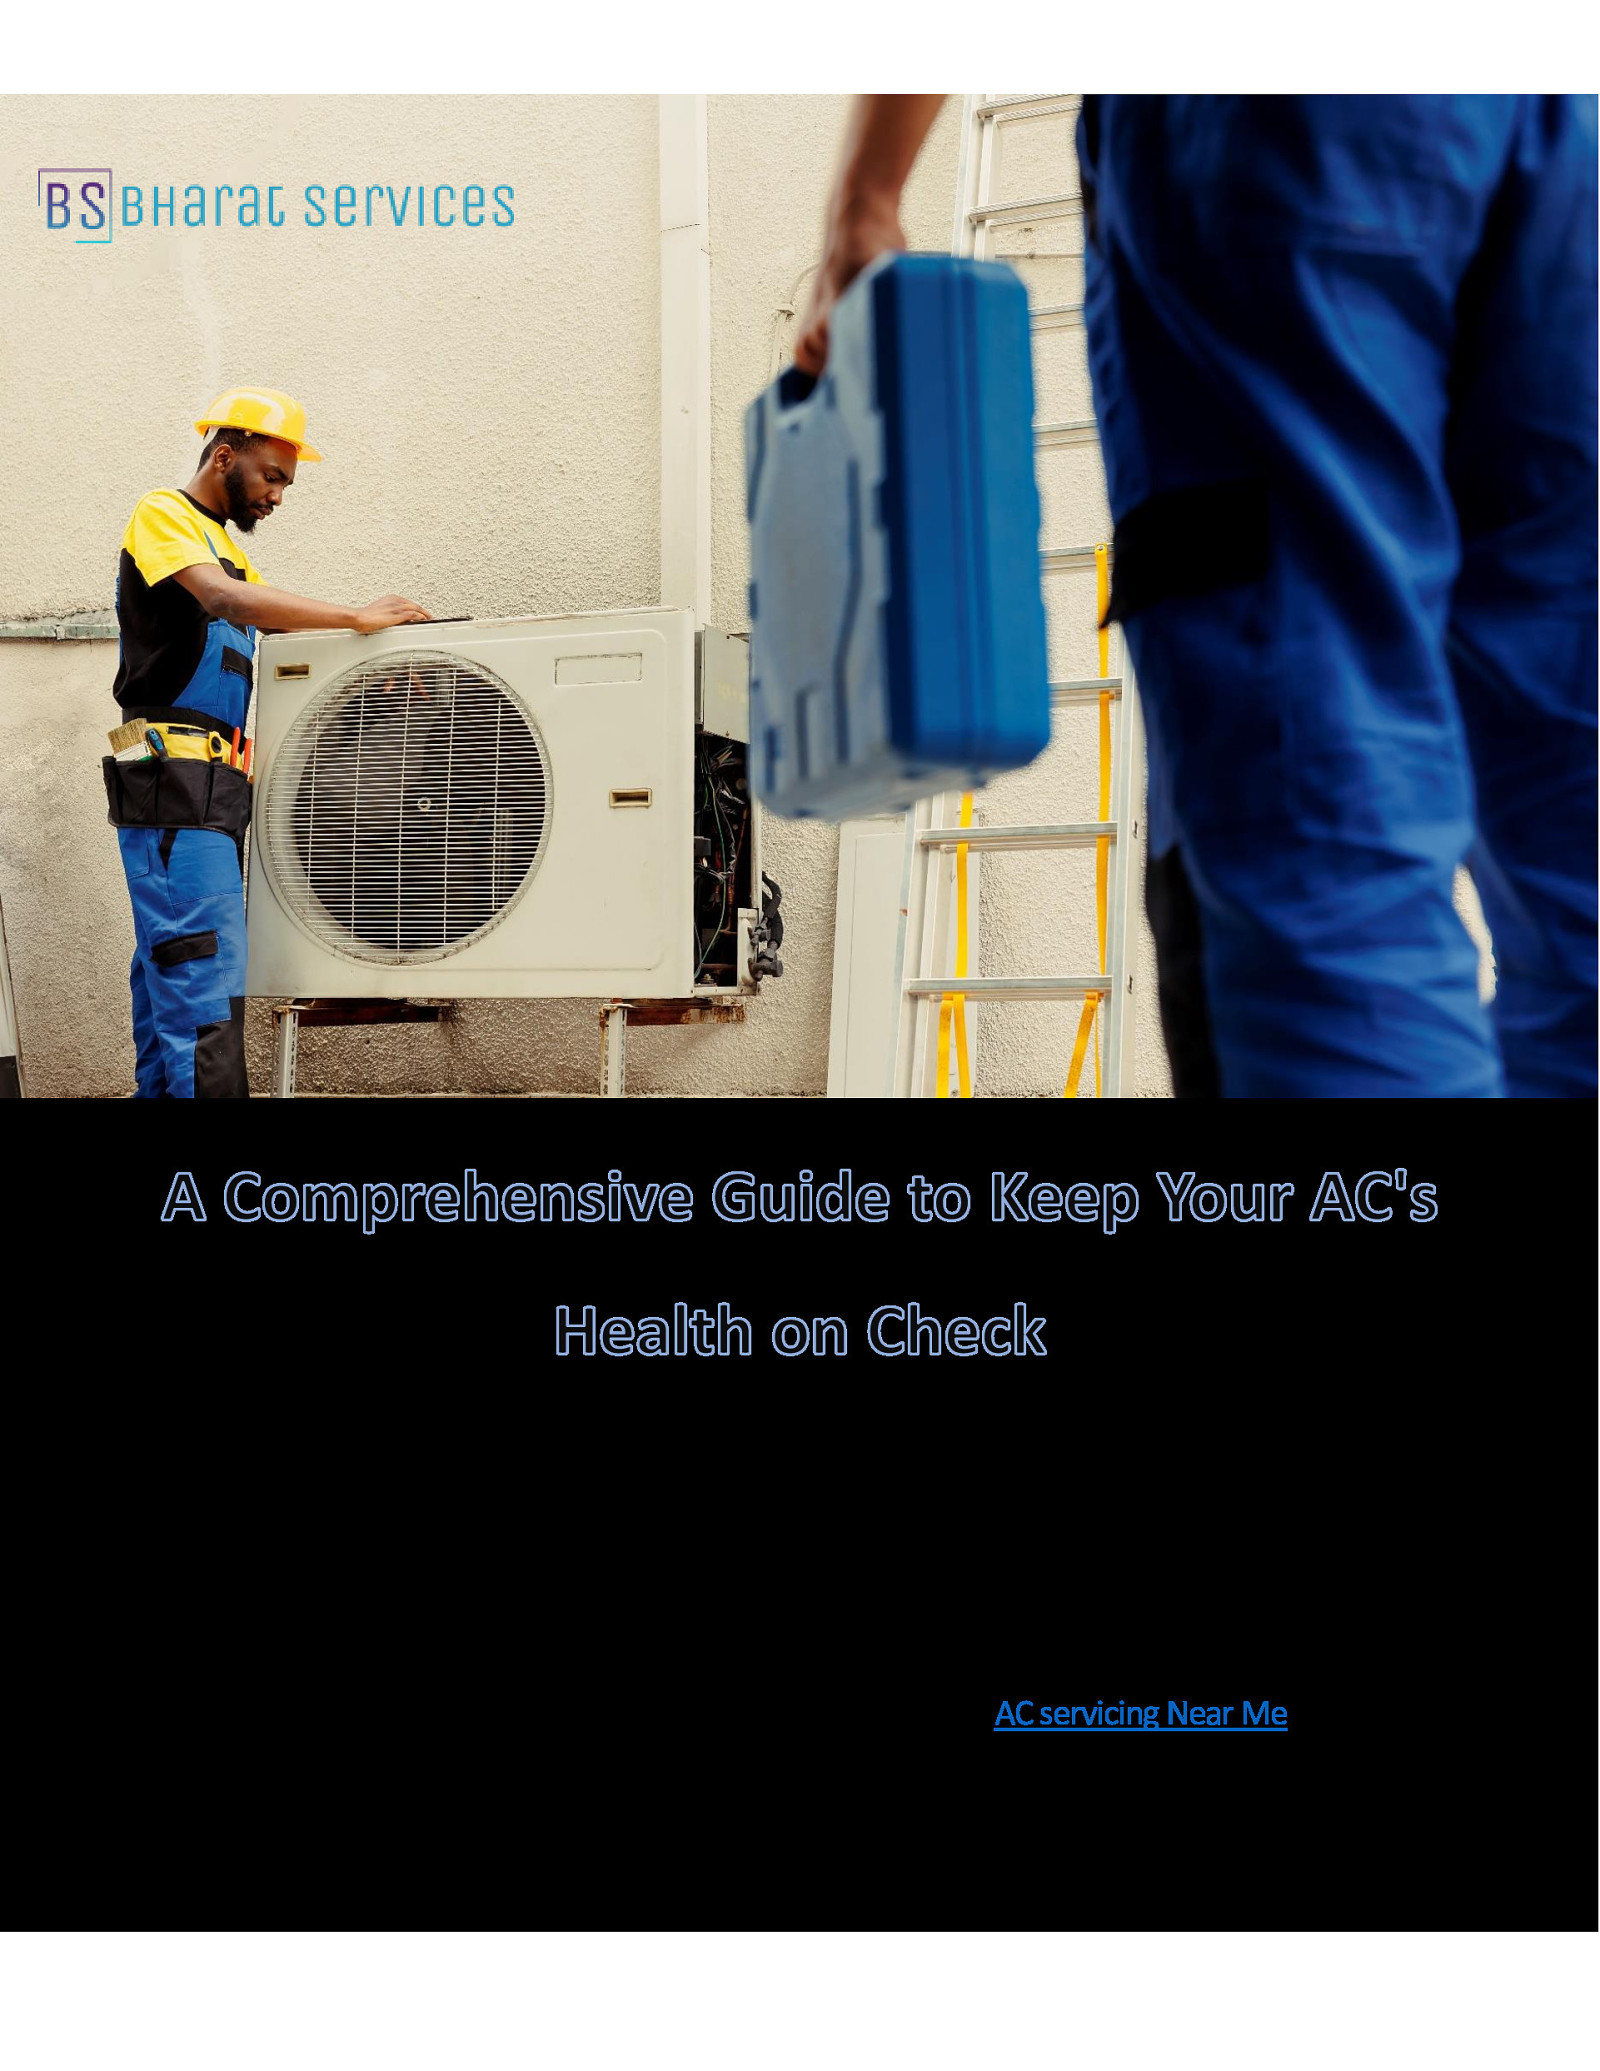 A Comprehensive Guide to Keep Your AC’s Health on Check